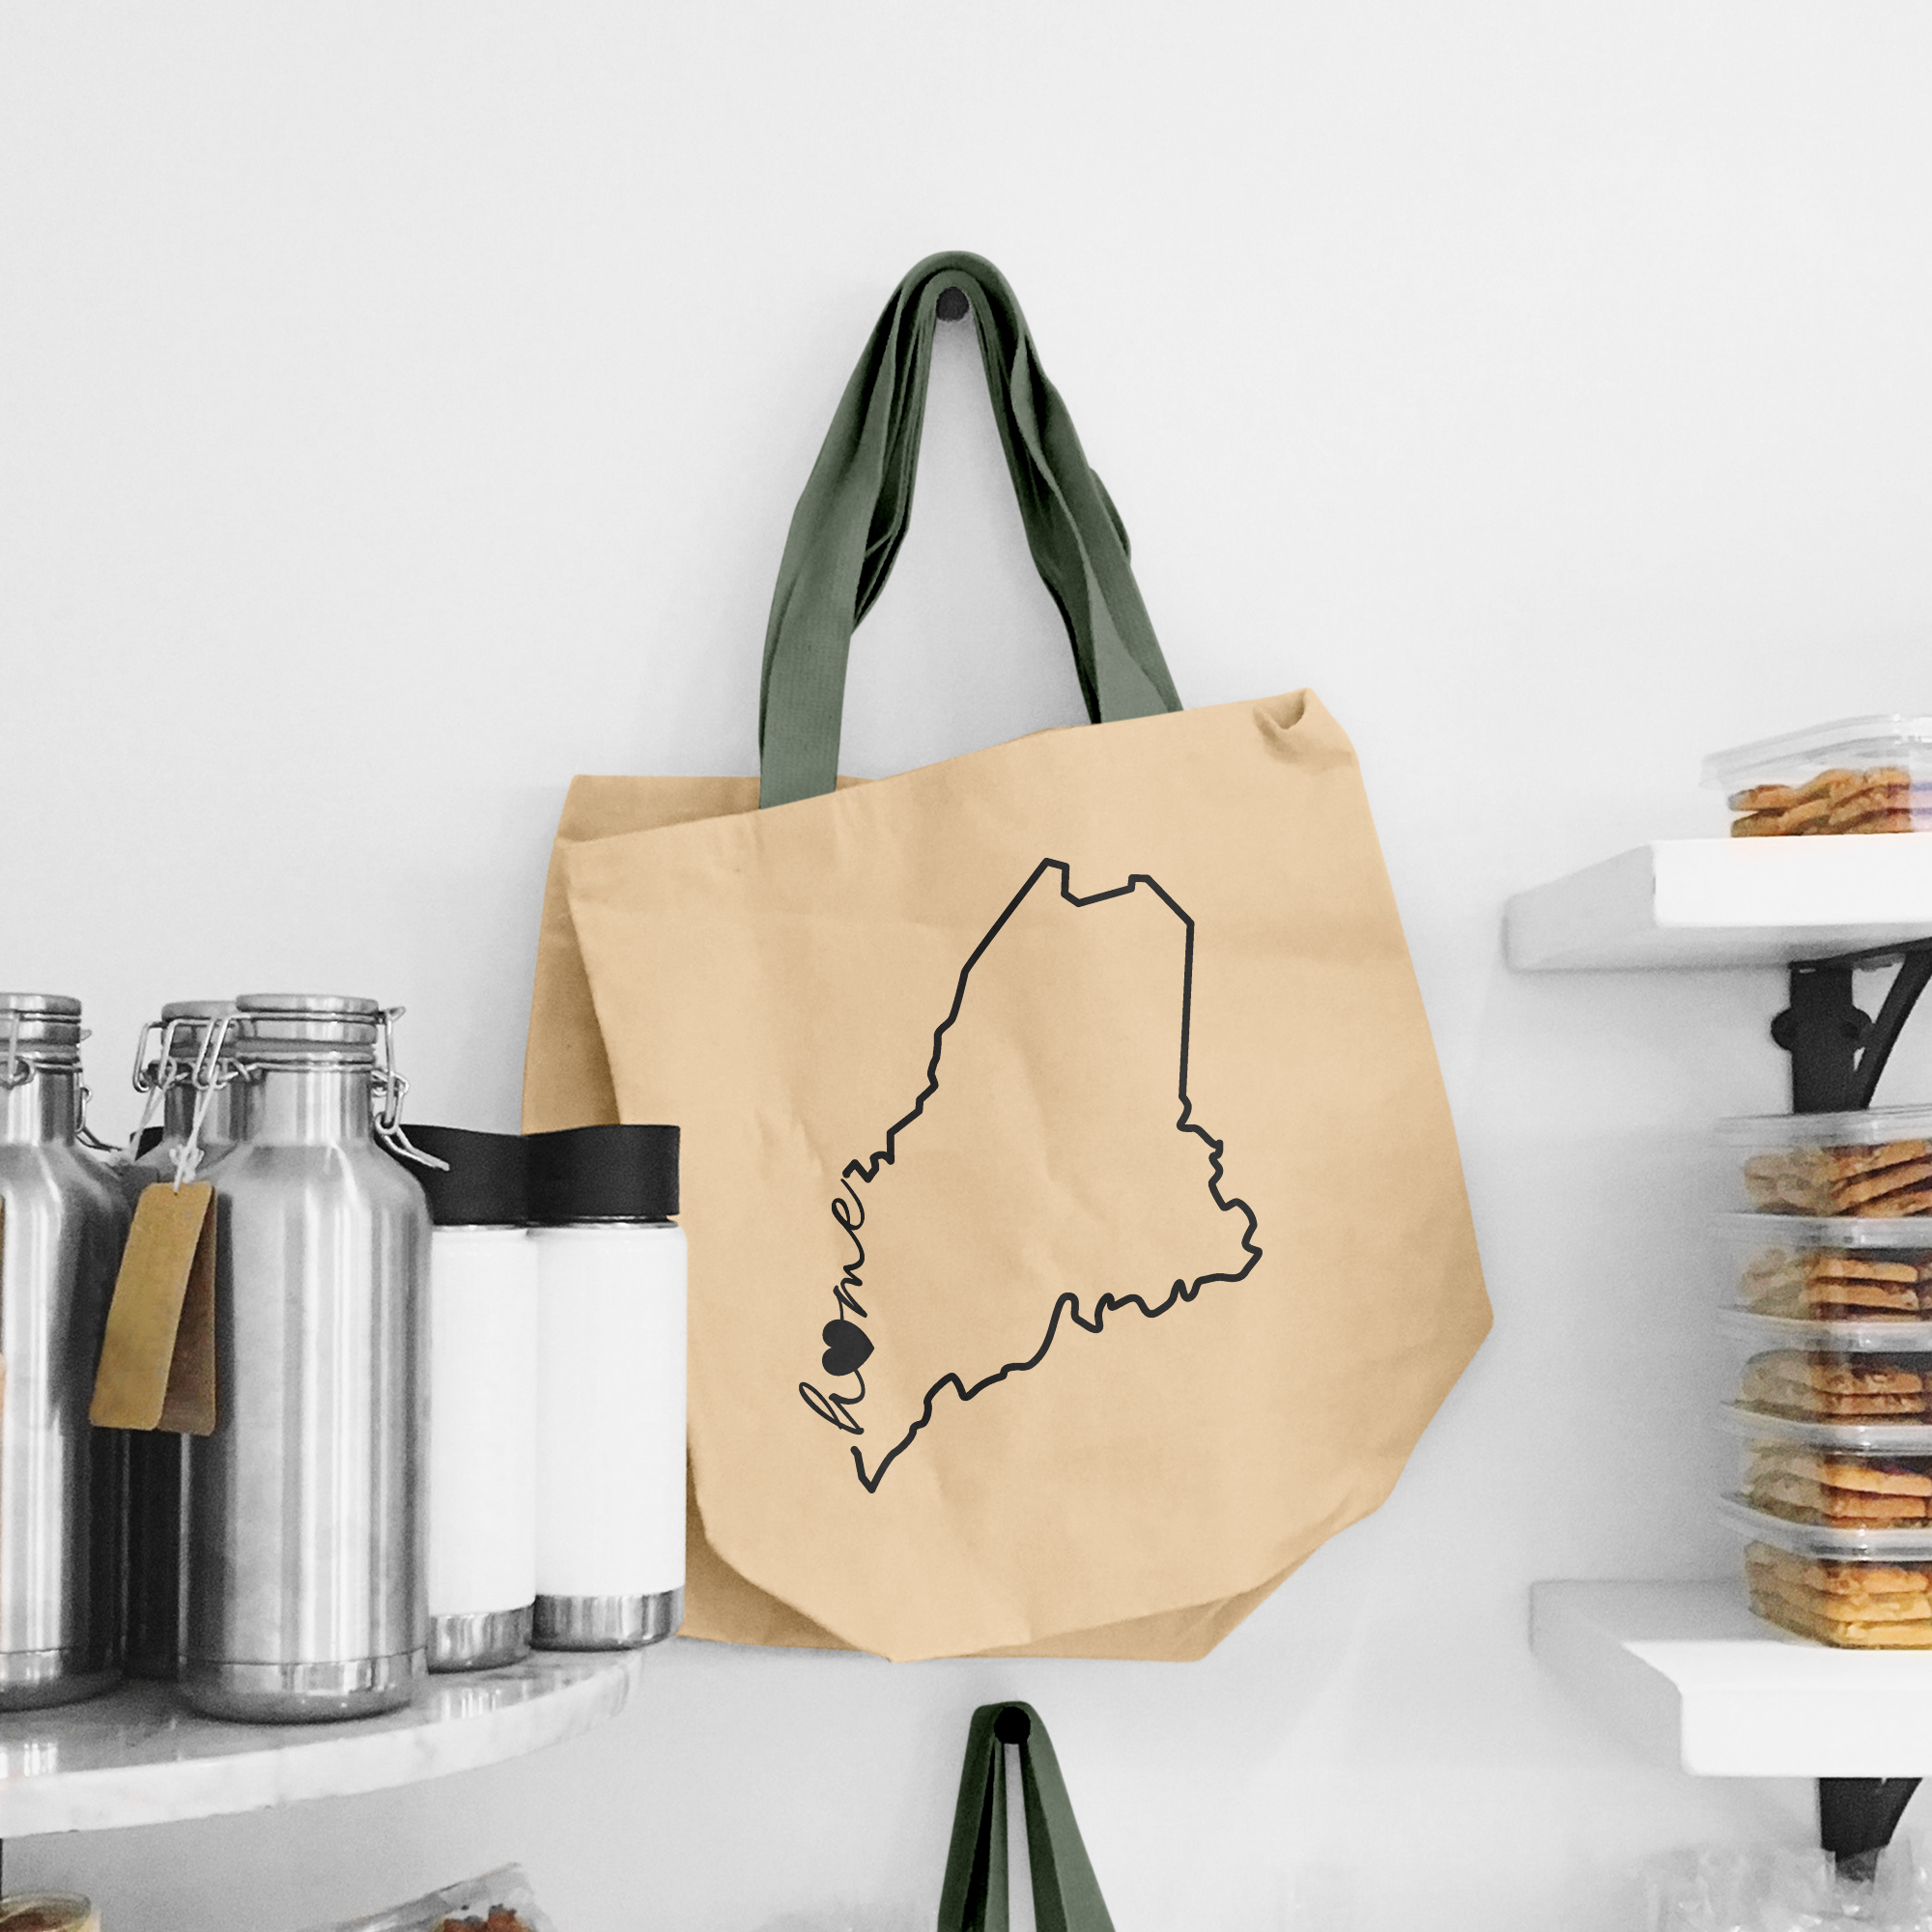 Black illustration of map of Maine on the beige shopping bag with dirty green handle.